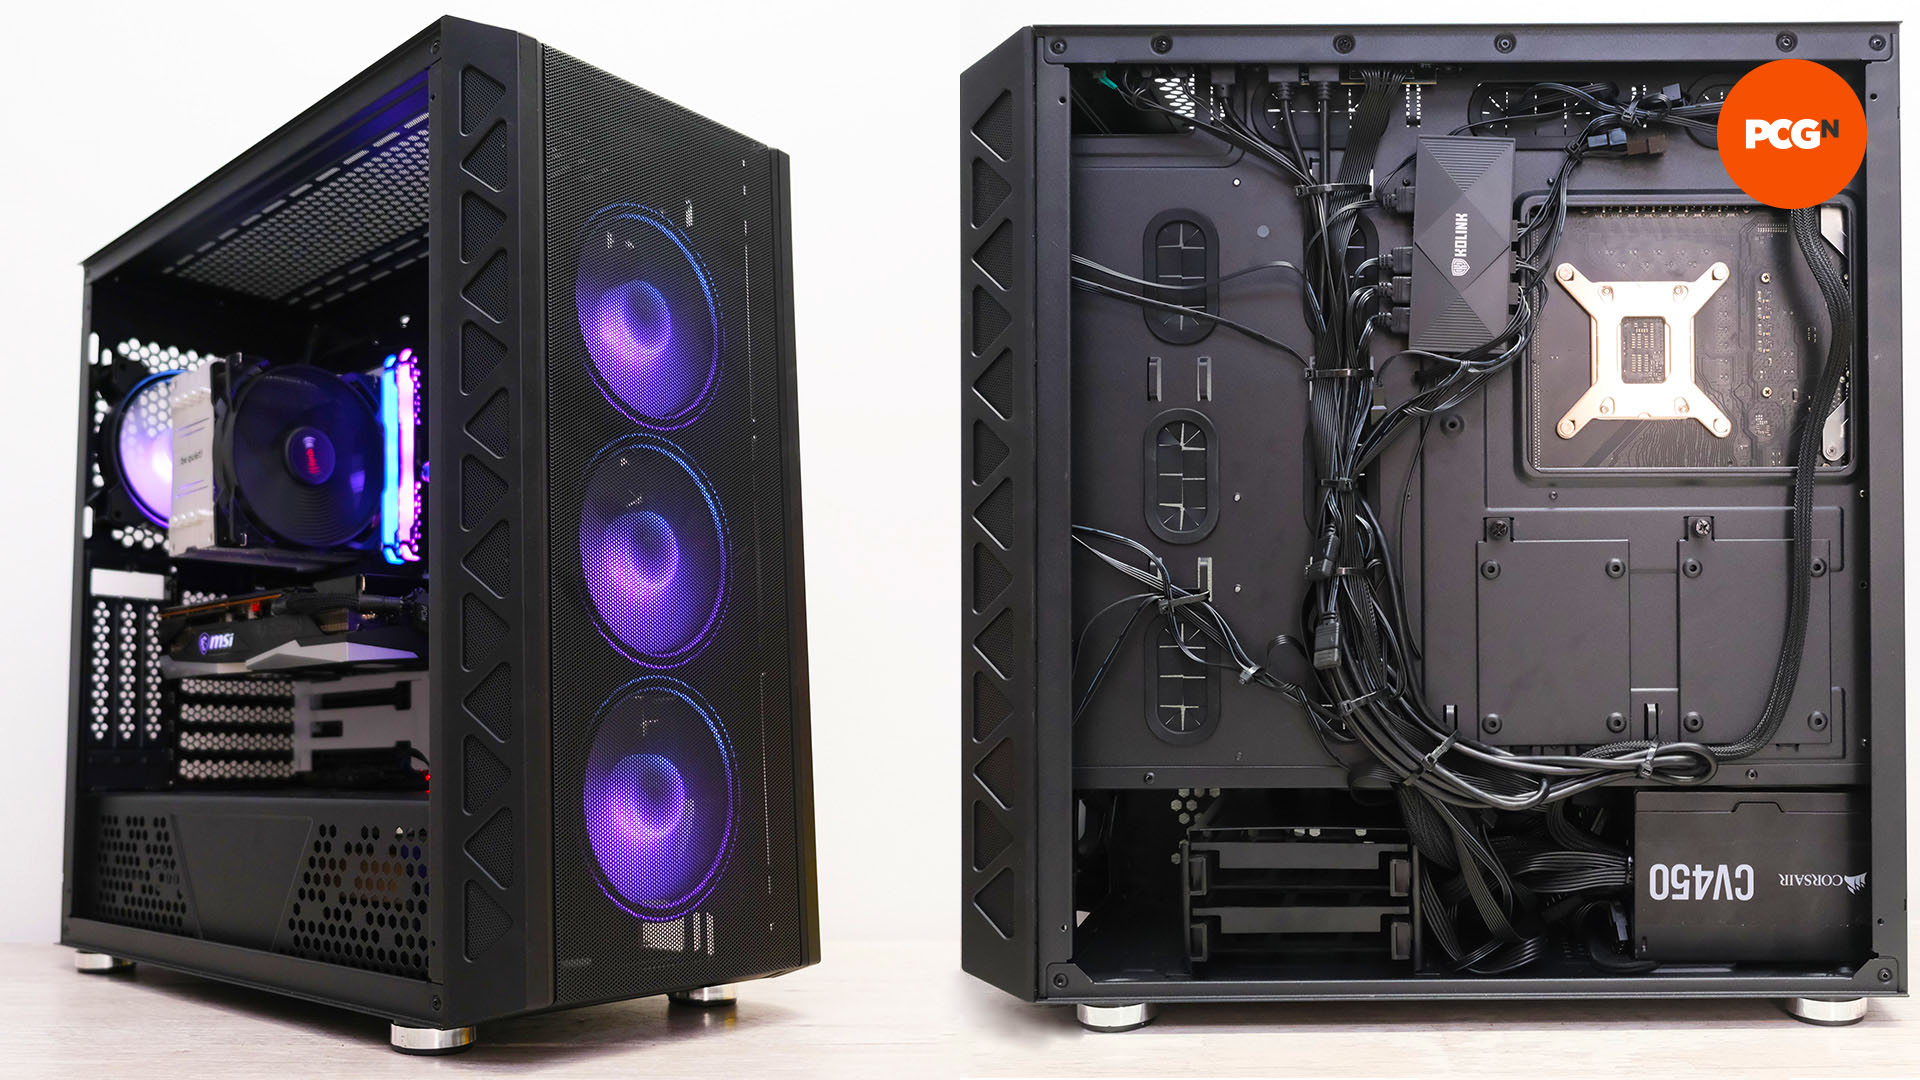 How to build a gaming PC: Finished system - front and back